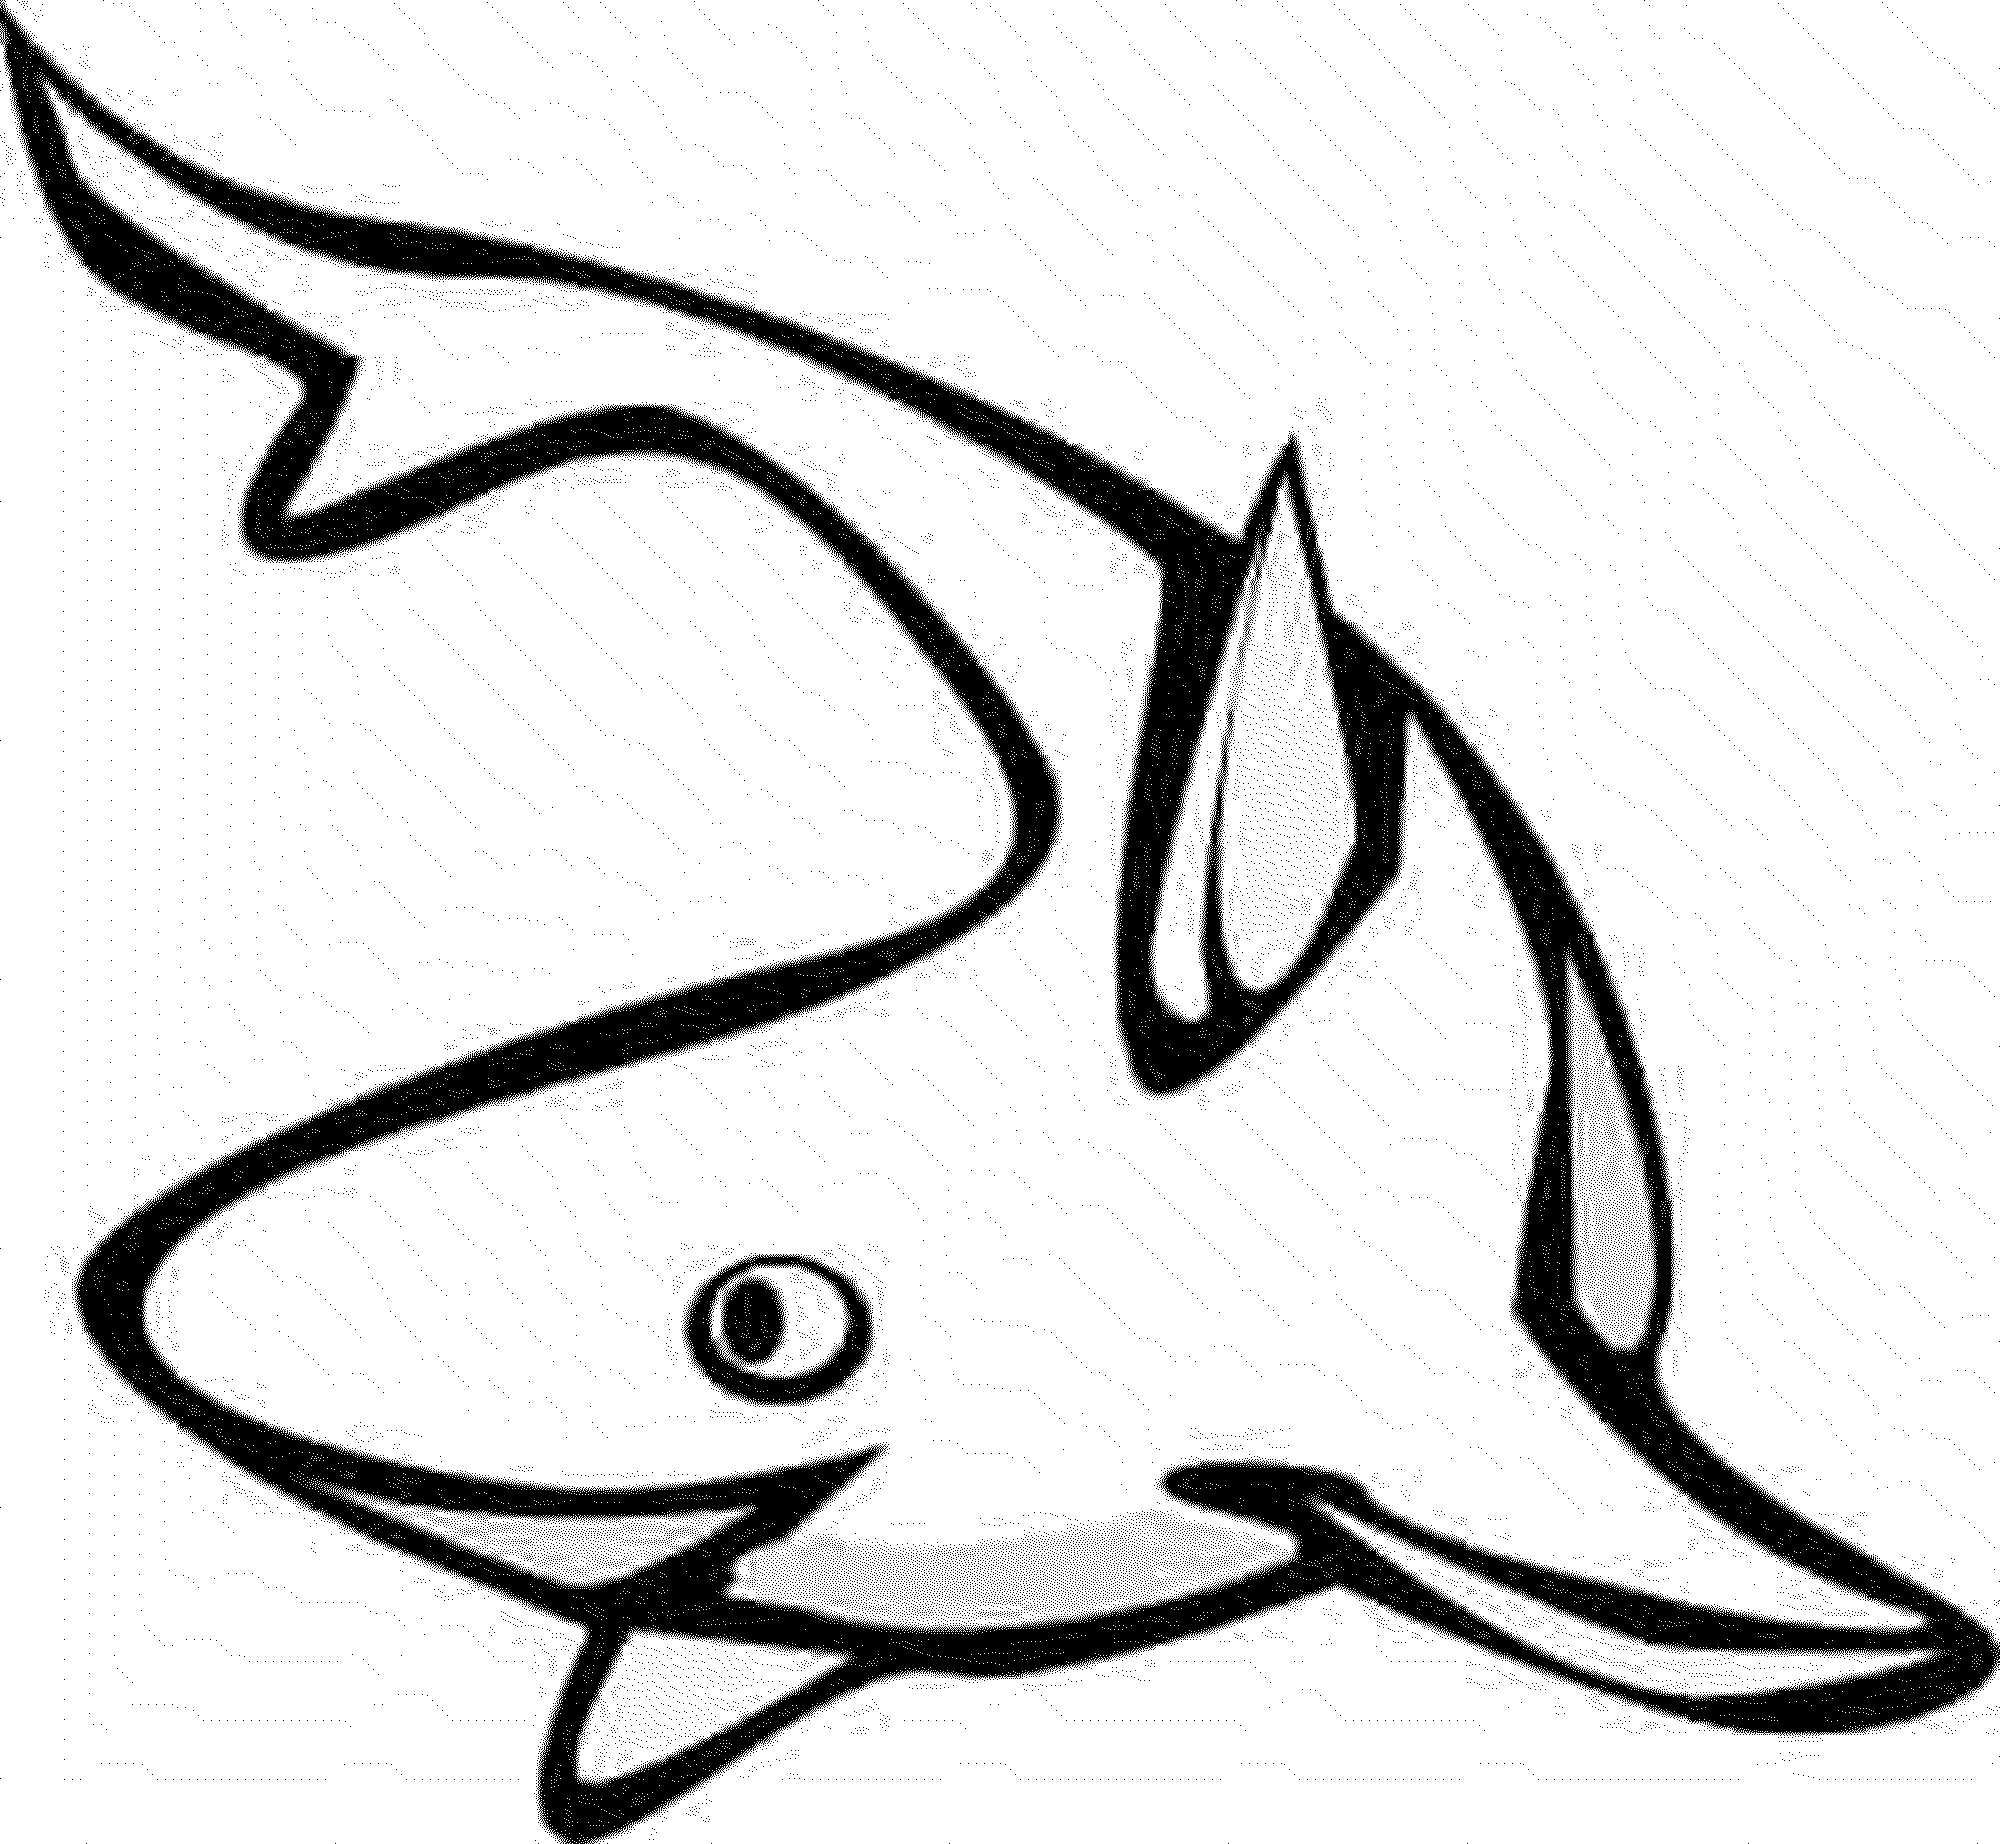 Print & Download Cute and Educative Fish Coloring Pages